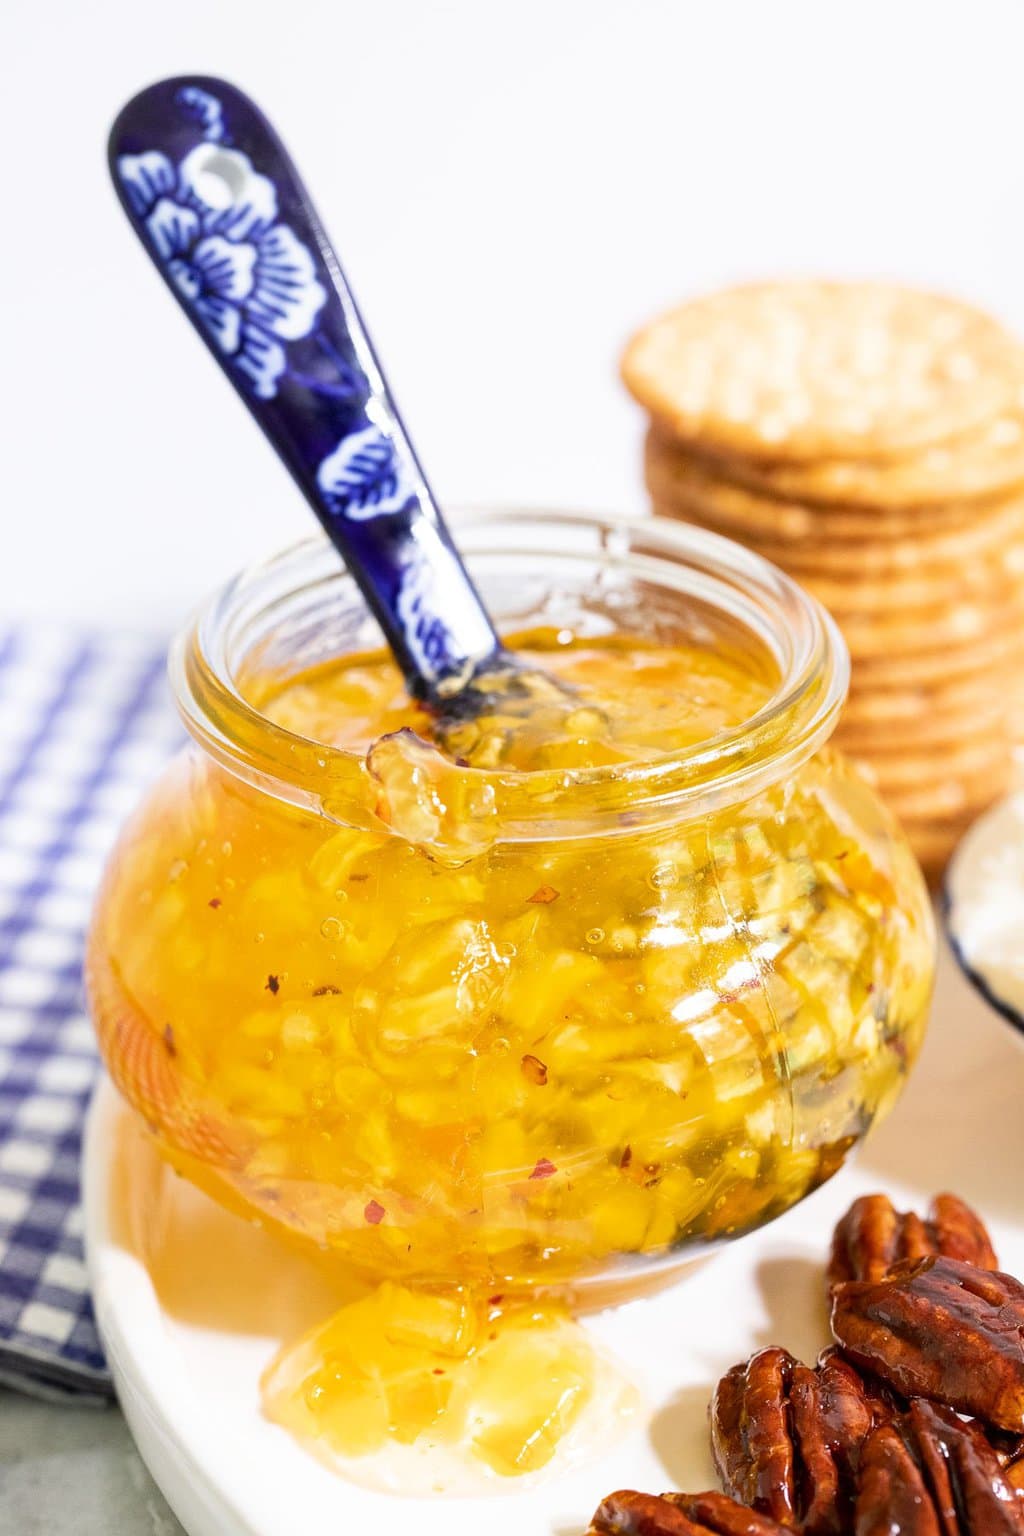 Vertical picture of Pineapple Habanero Pepper Jelly in a glass jar